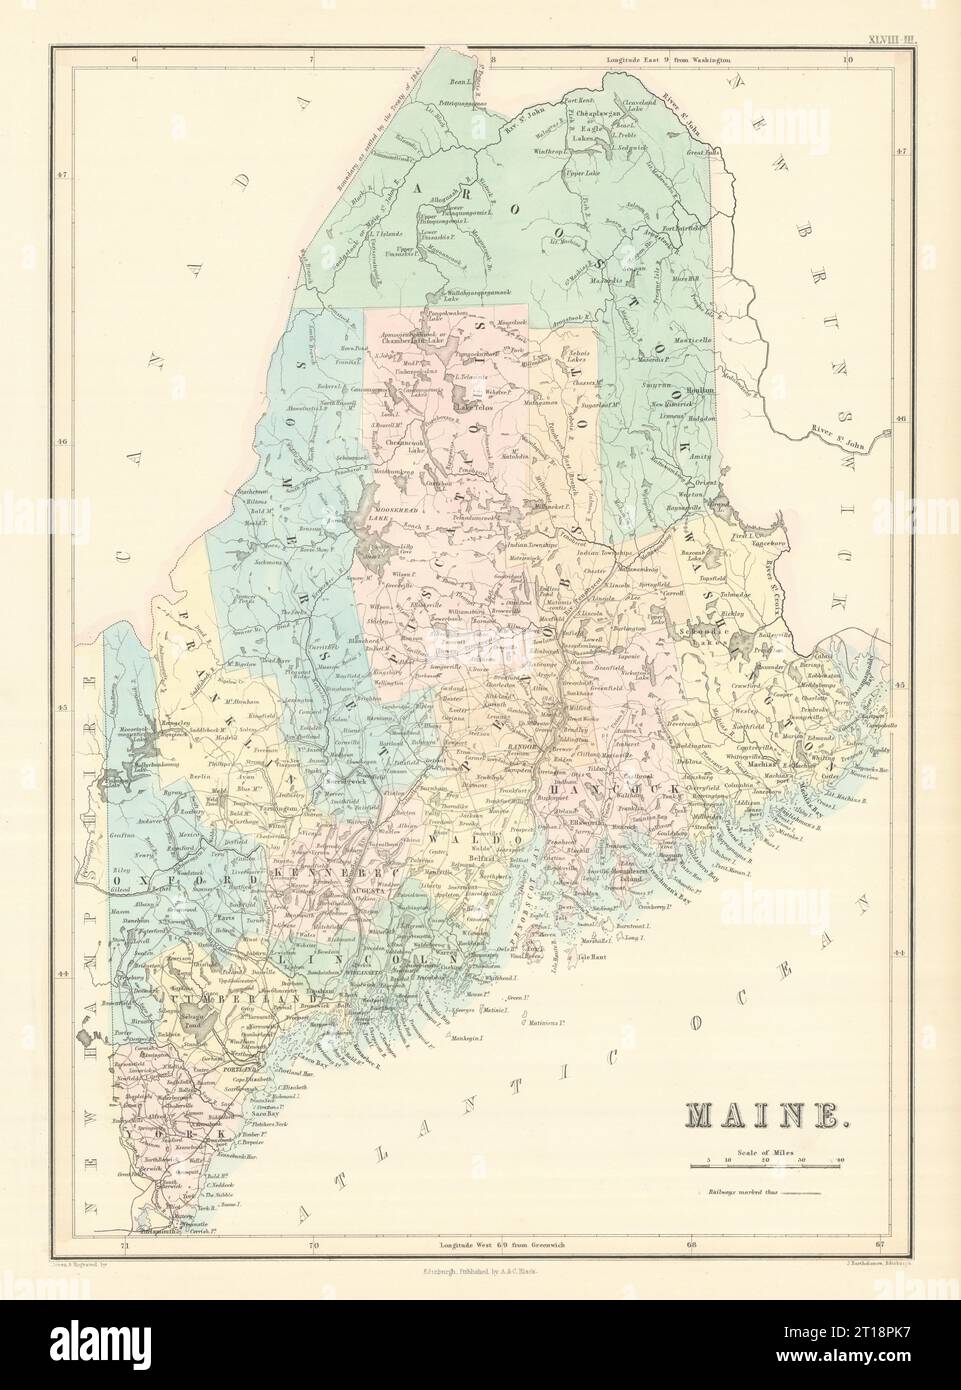 Maine state map showing counties. JOHN BARTHOLOMEW 1854 old antique chart Stock Photo